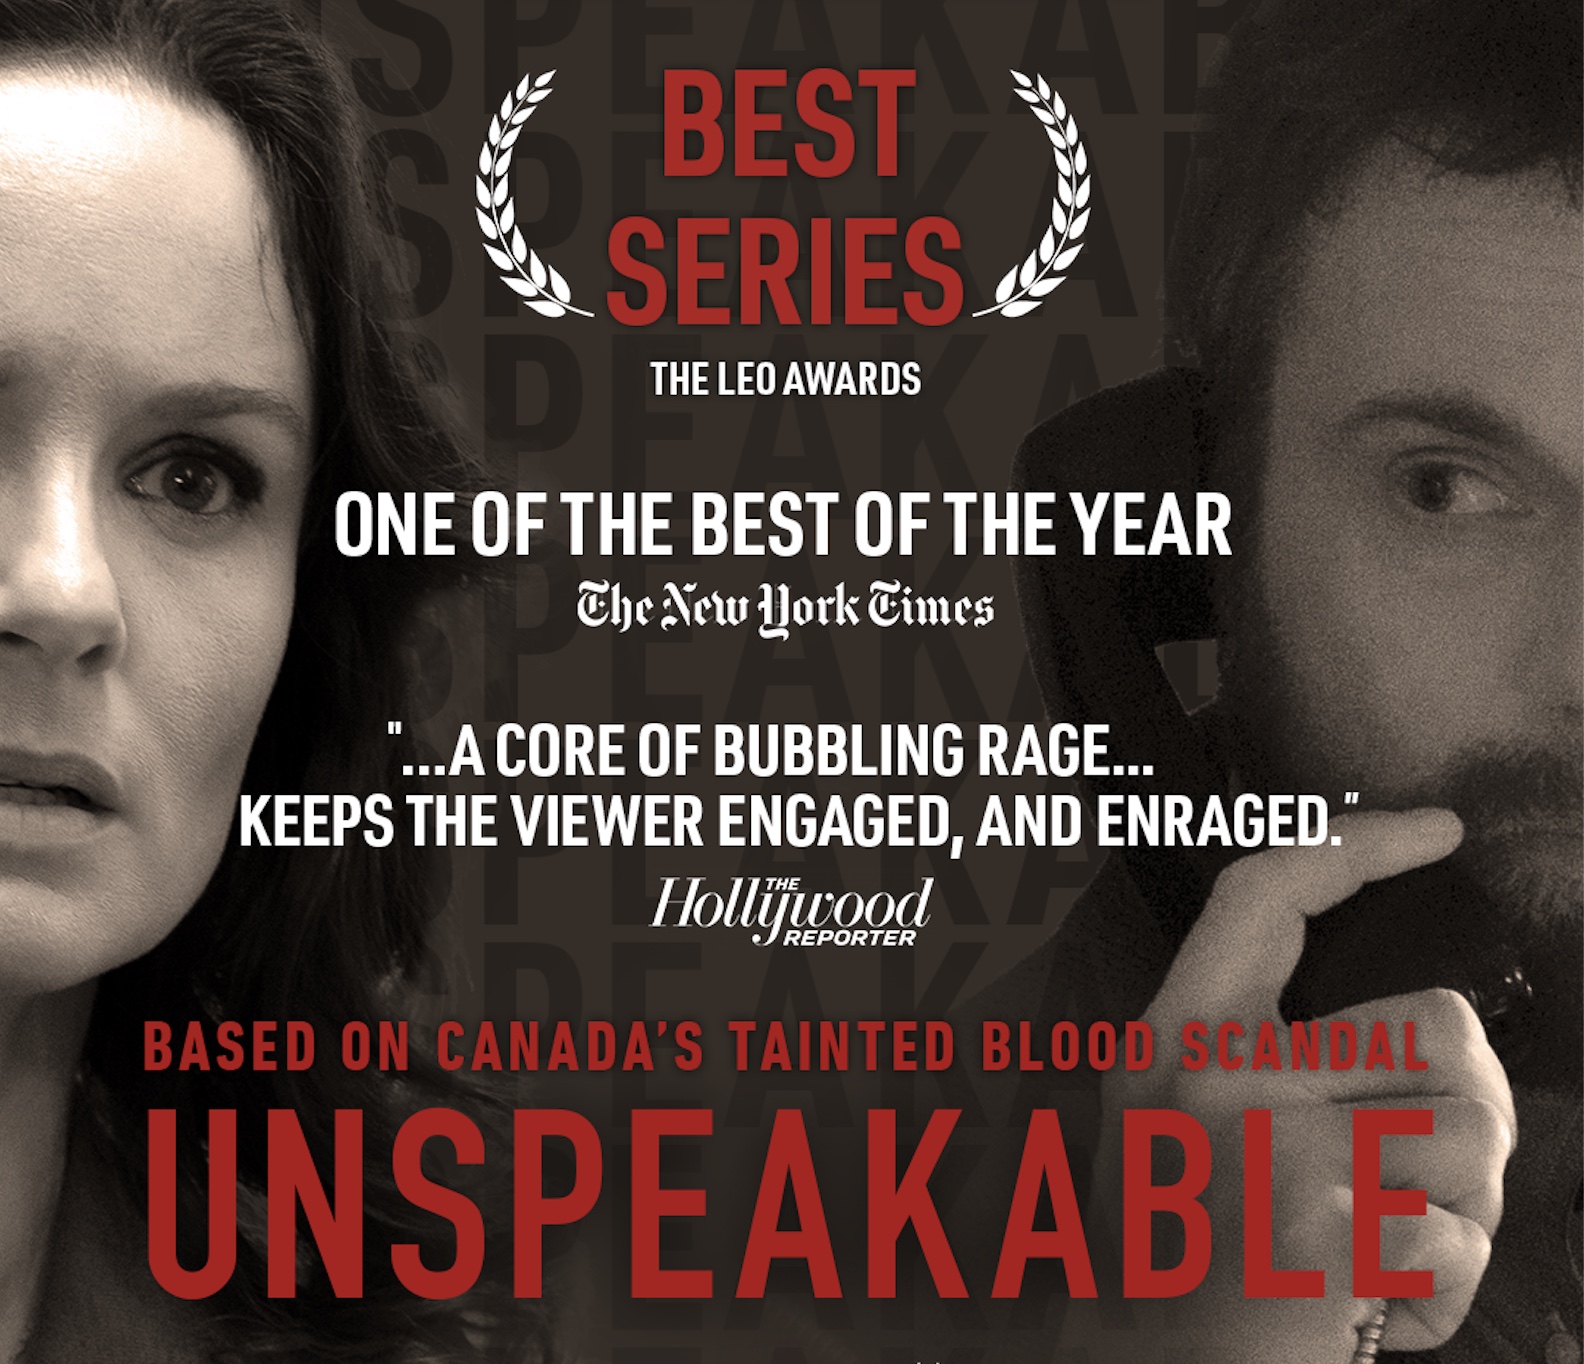 ad for Unspeakable series